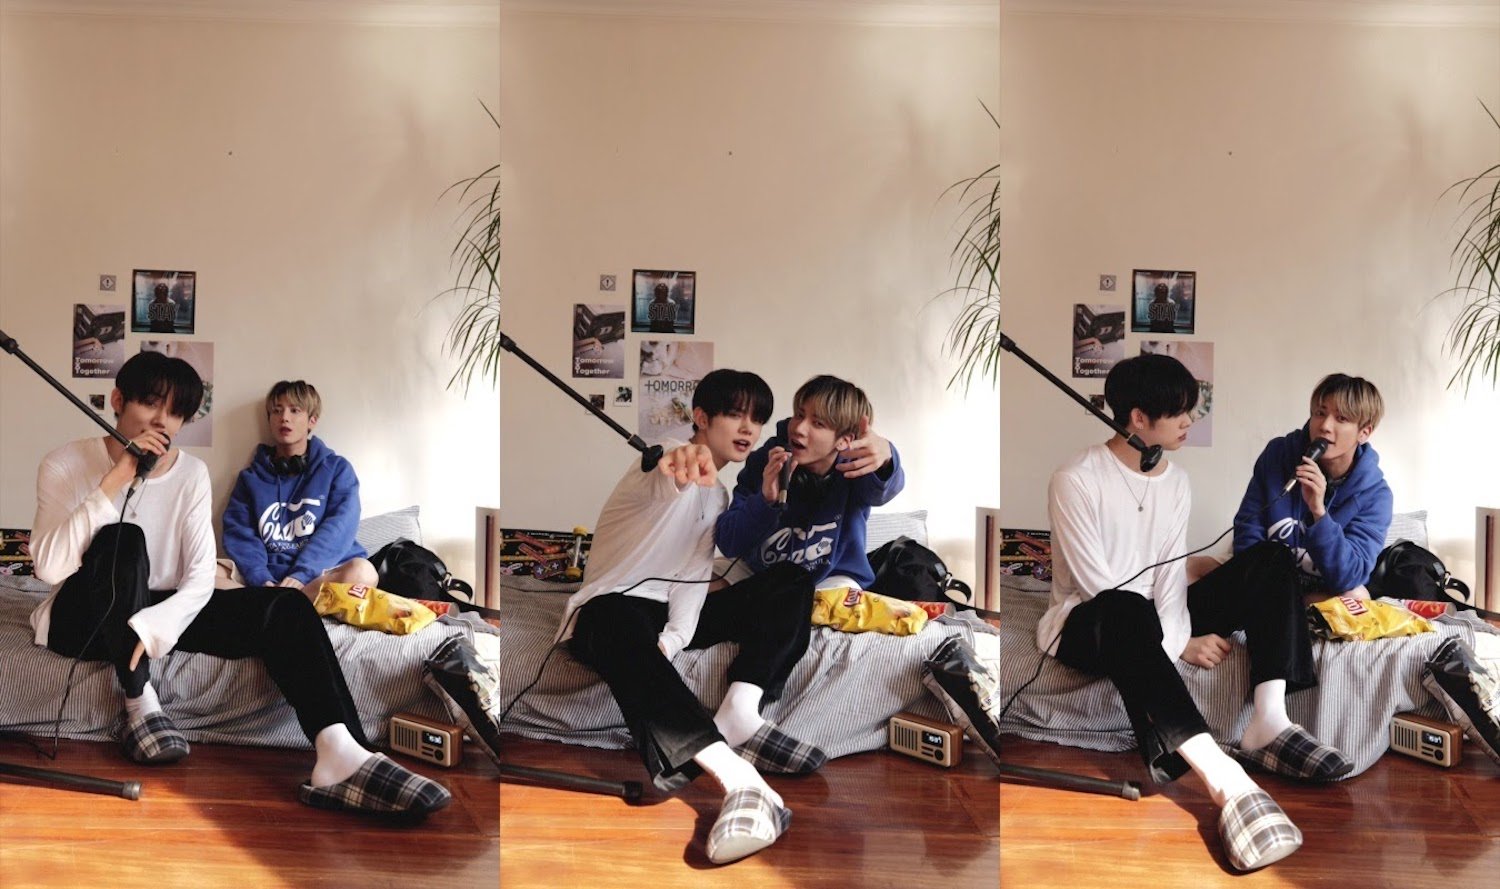 Three joined photos of Yeonjun and Taehyun from TXT sitting on a mattress on the floor